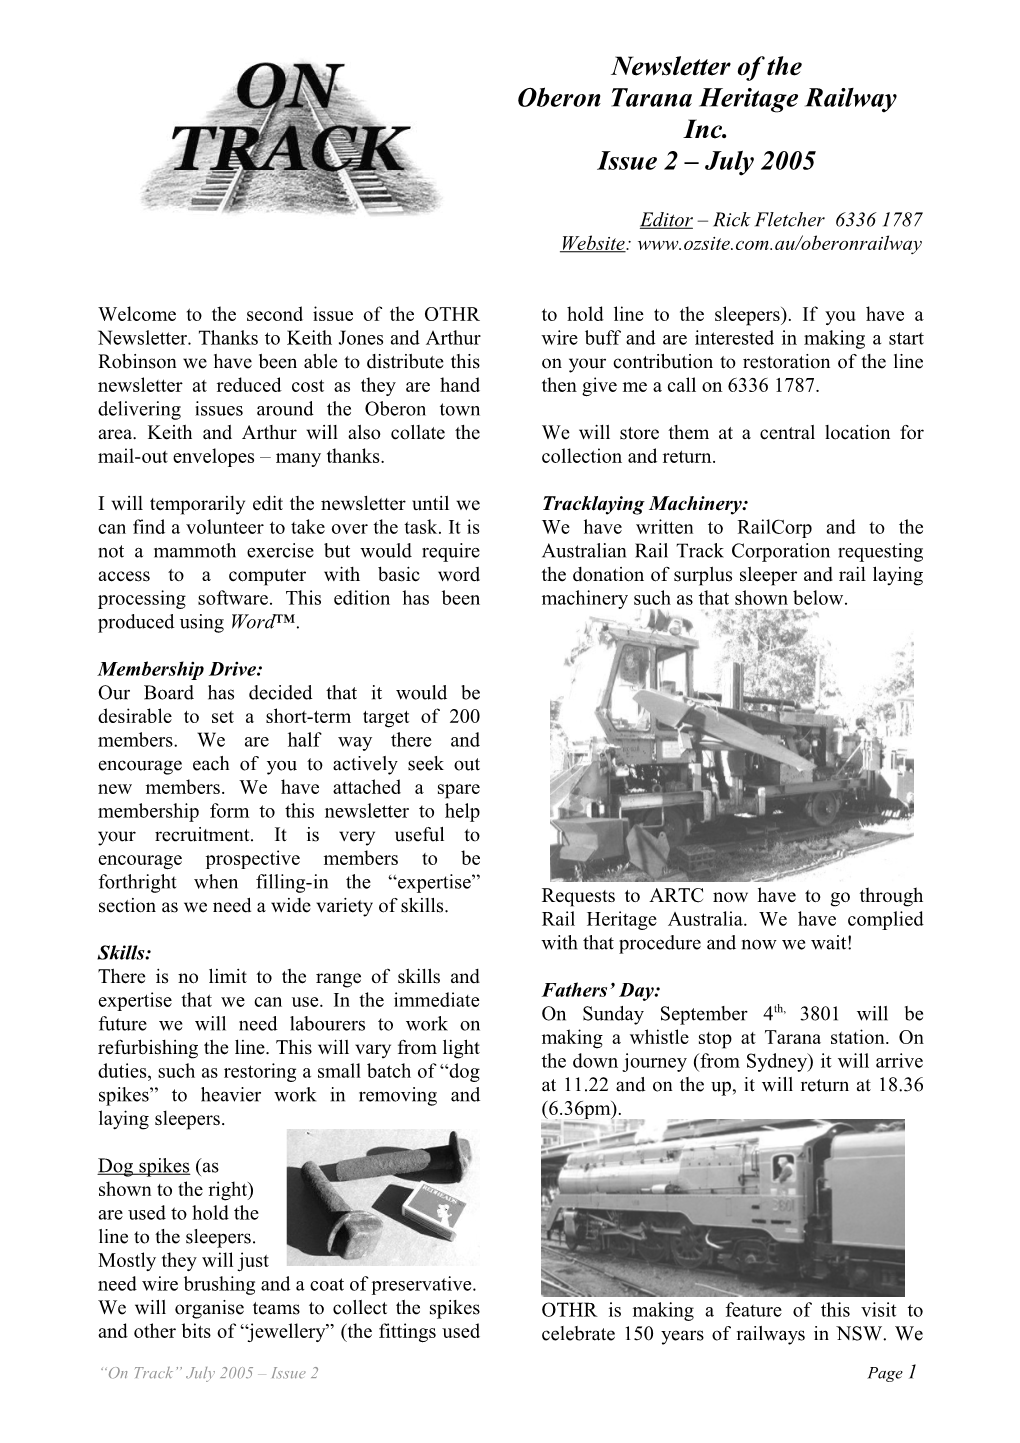 On Track July 2005 Issue 2 Page 1